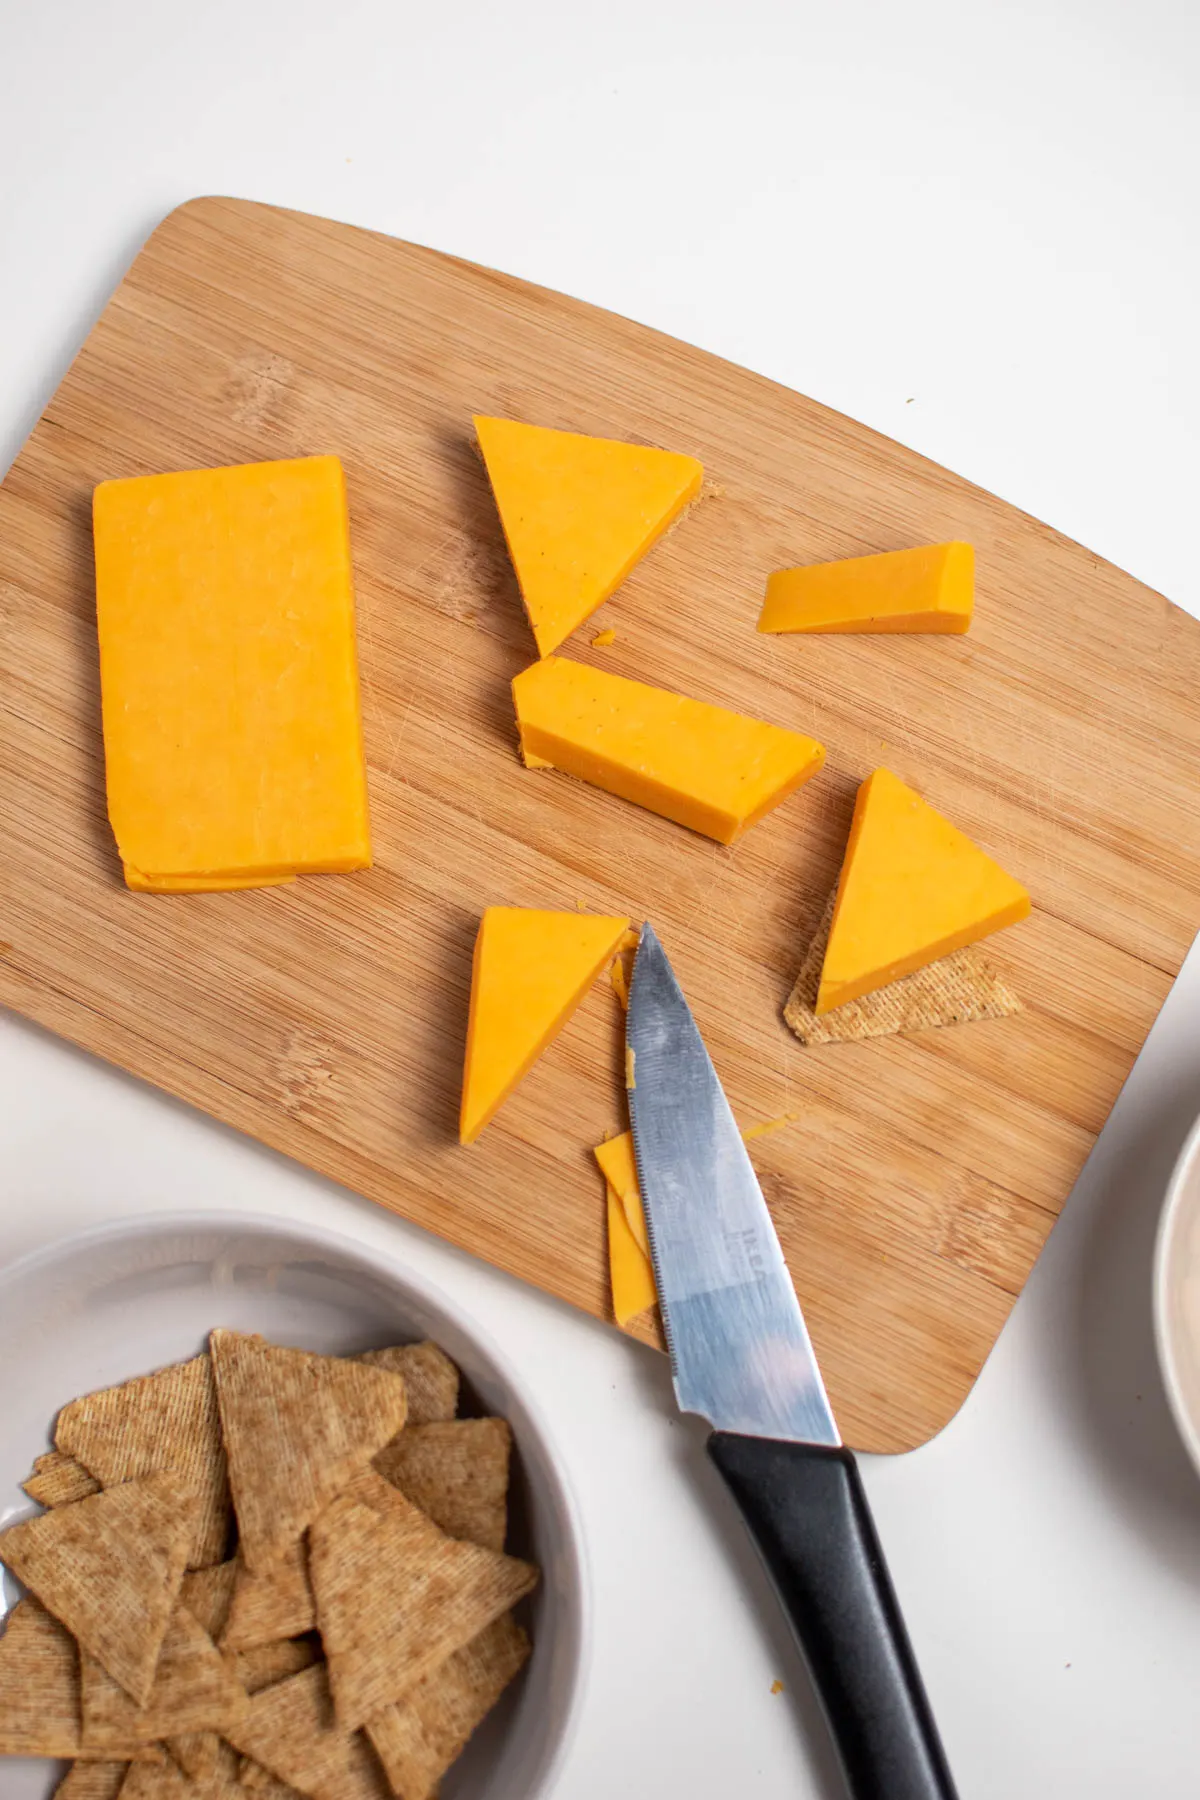 Triangle pieces of cheese on wood cutting board with knife and bowl of crackers nearby.